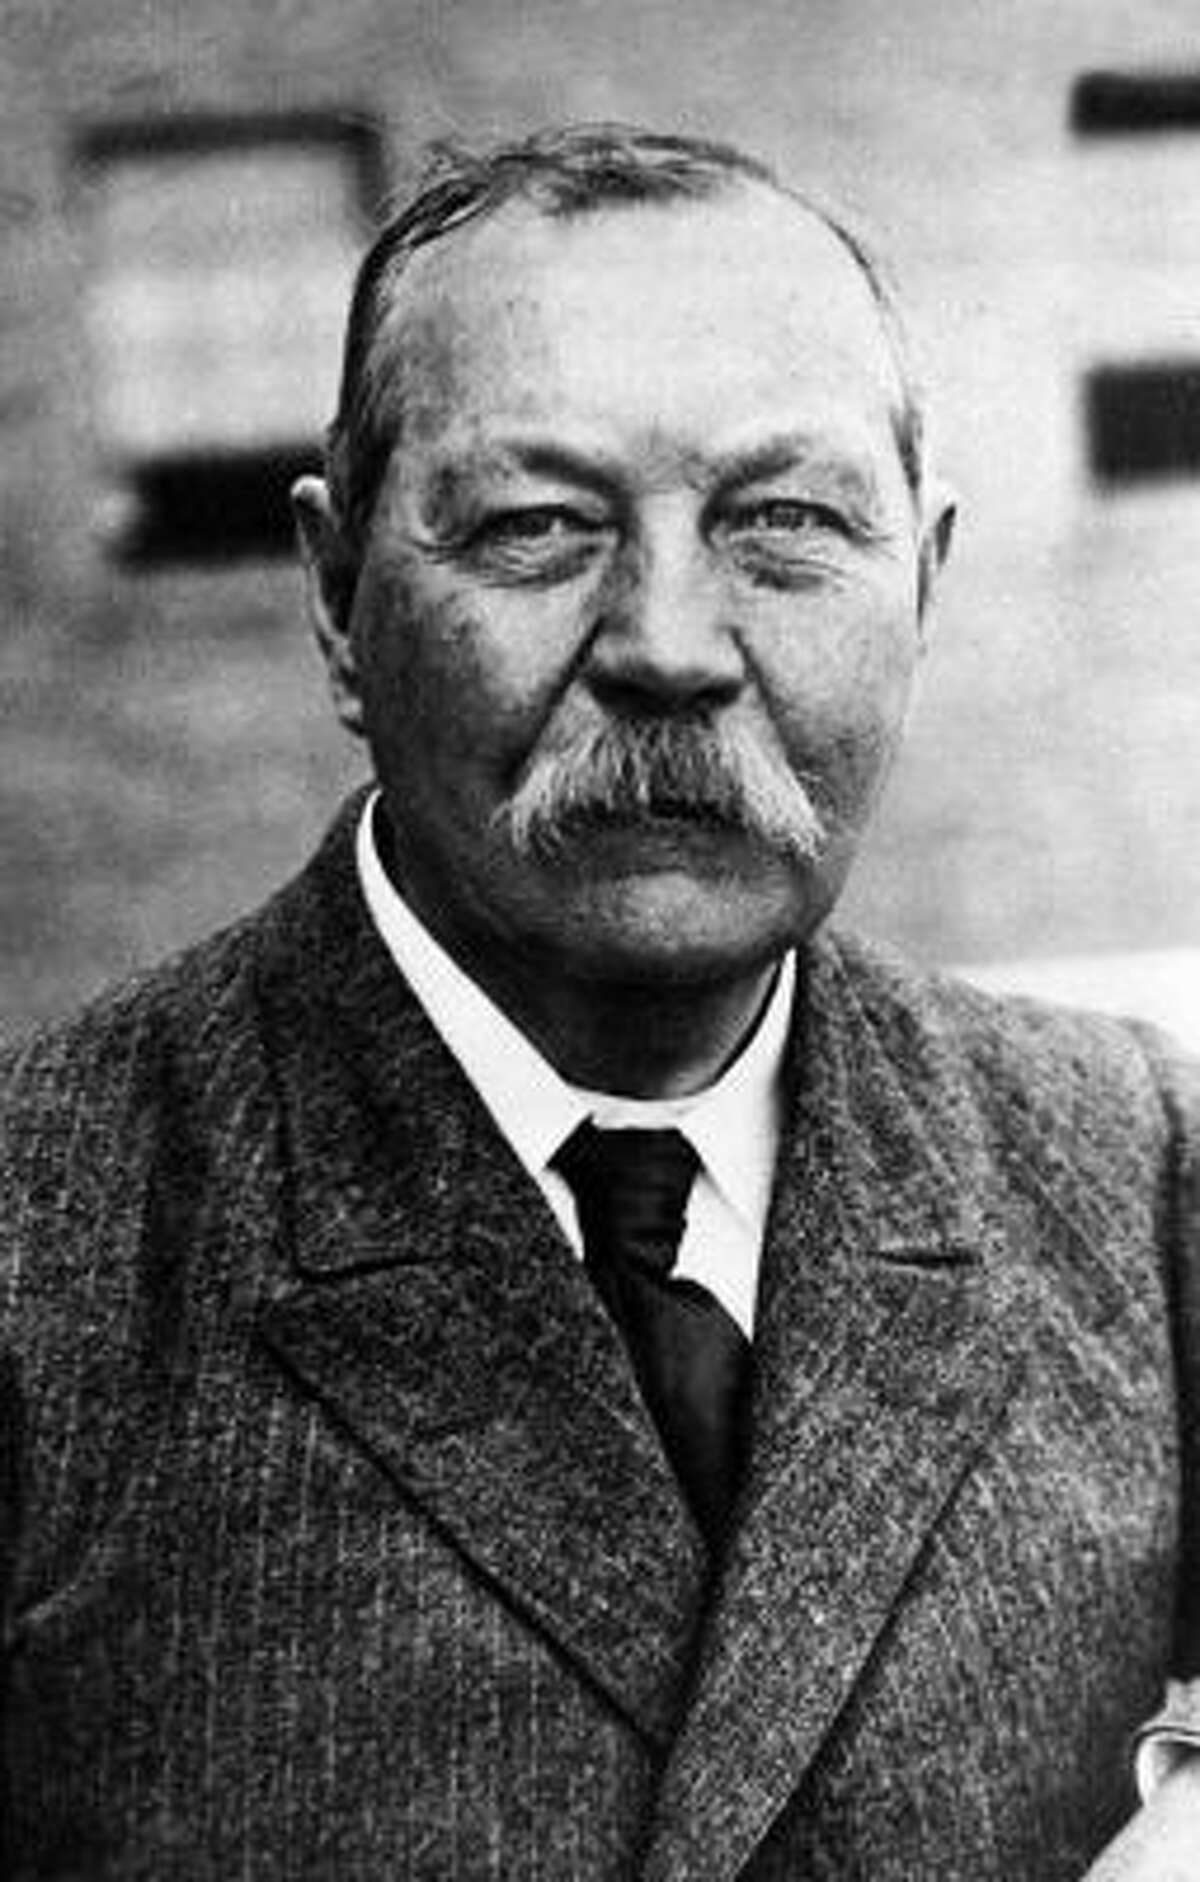 This 1930 photo shows Sir Arthur Conan Doyle, the author and creator of Sherlock Holmes. Writer Leslie Klinger is challenging the Conan Doyle Estate, LTD over the right to use the Sherlock Holmes character in new tales.